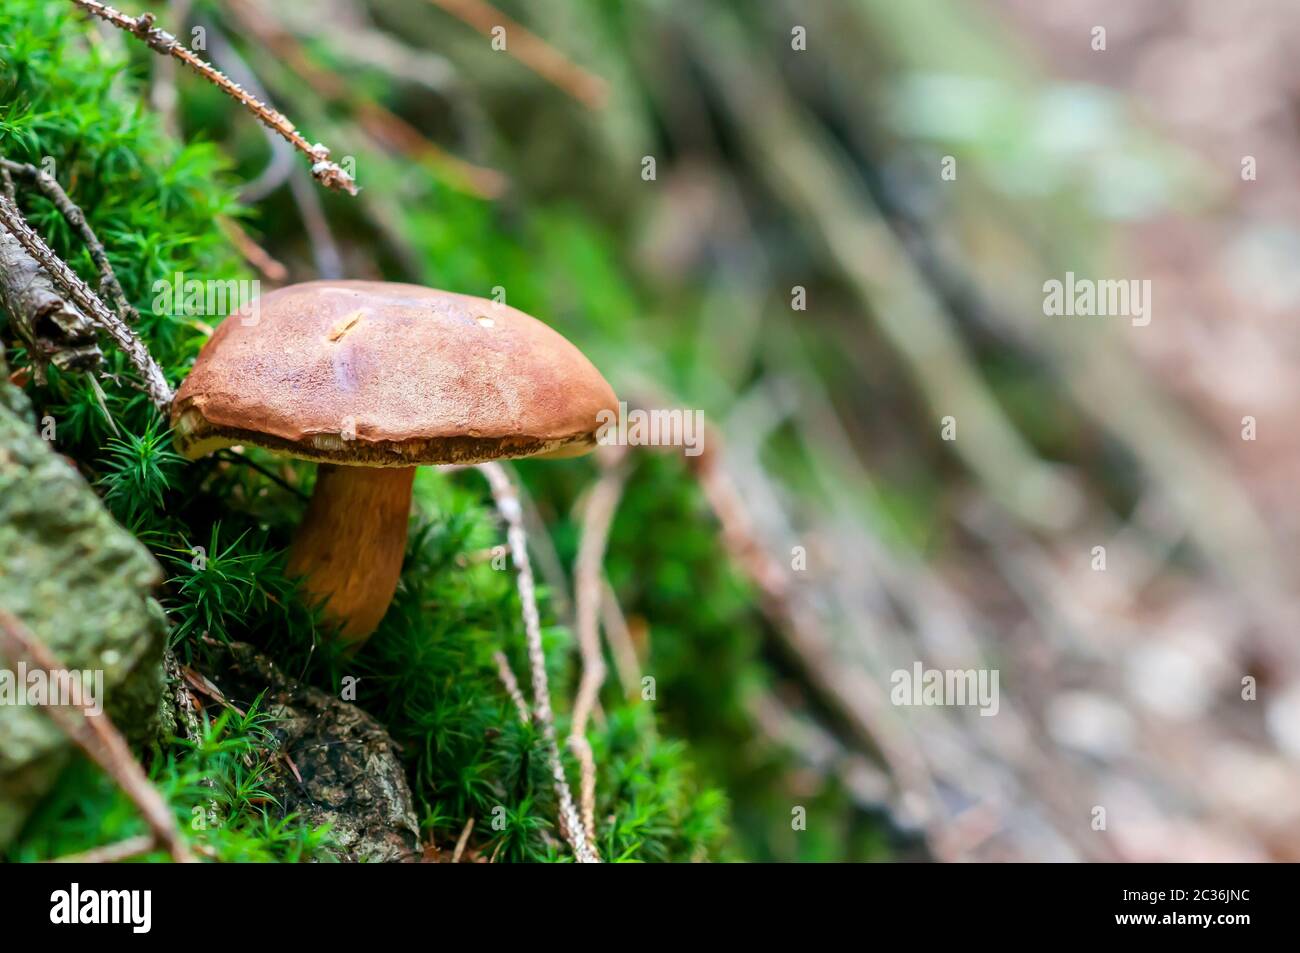 Imleria badia, commonly known as the bay bolete, Edible fungus in the forest Stock Photo